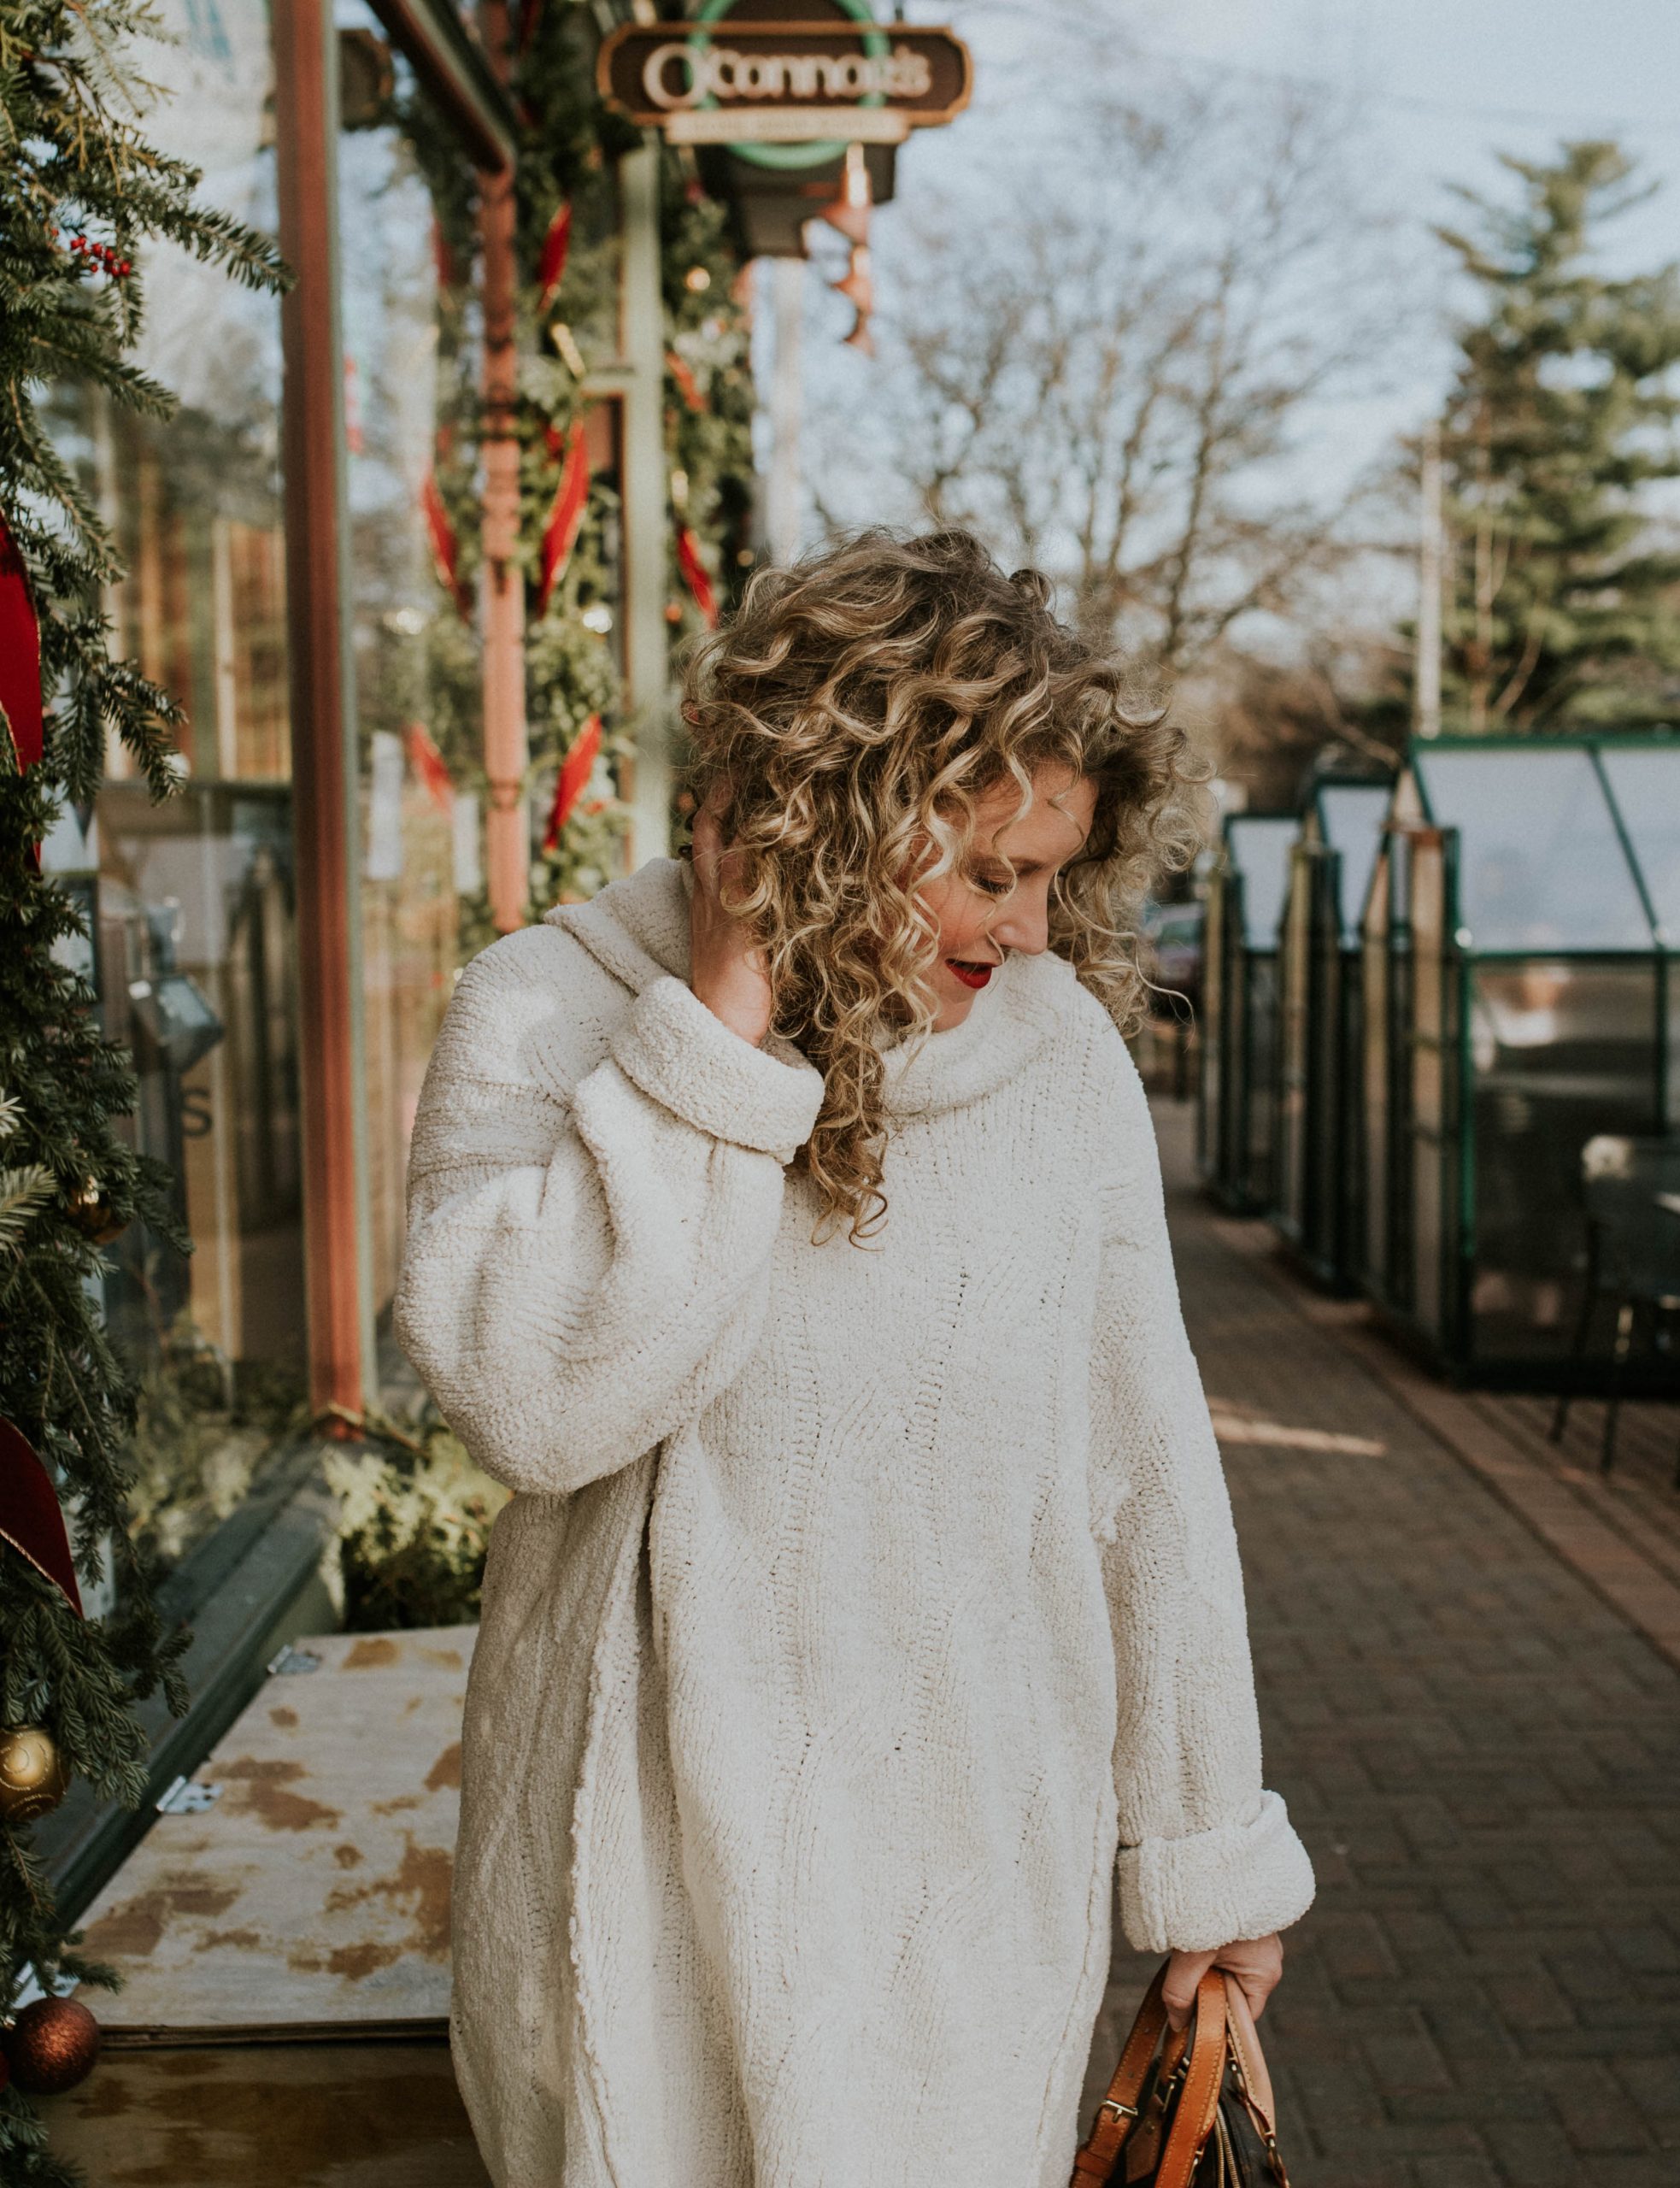 Curly Hair with Cream Tunic 